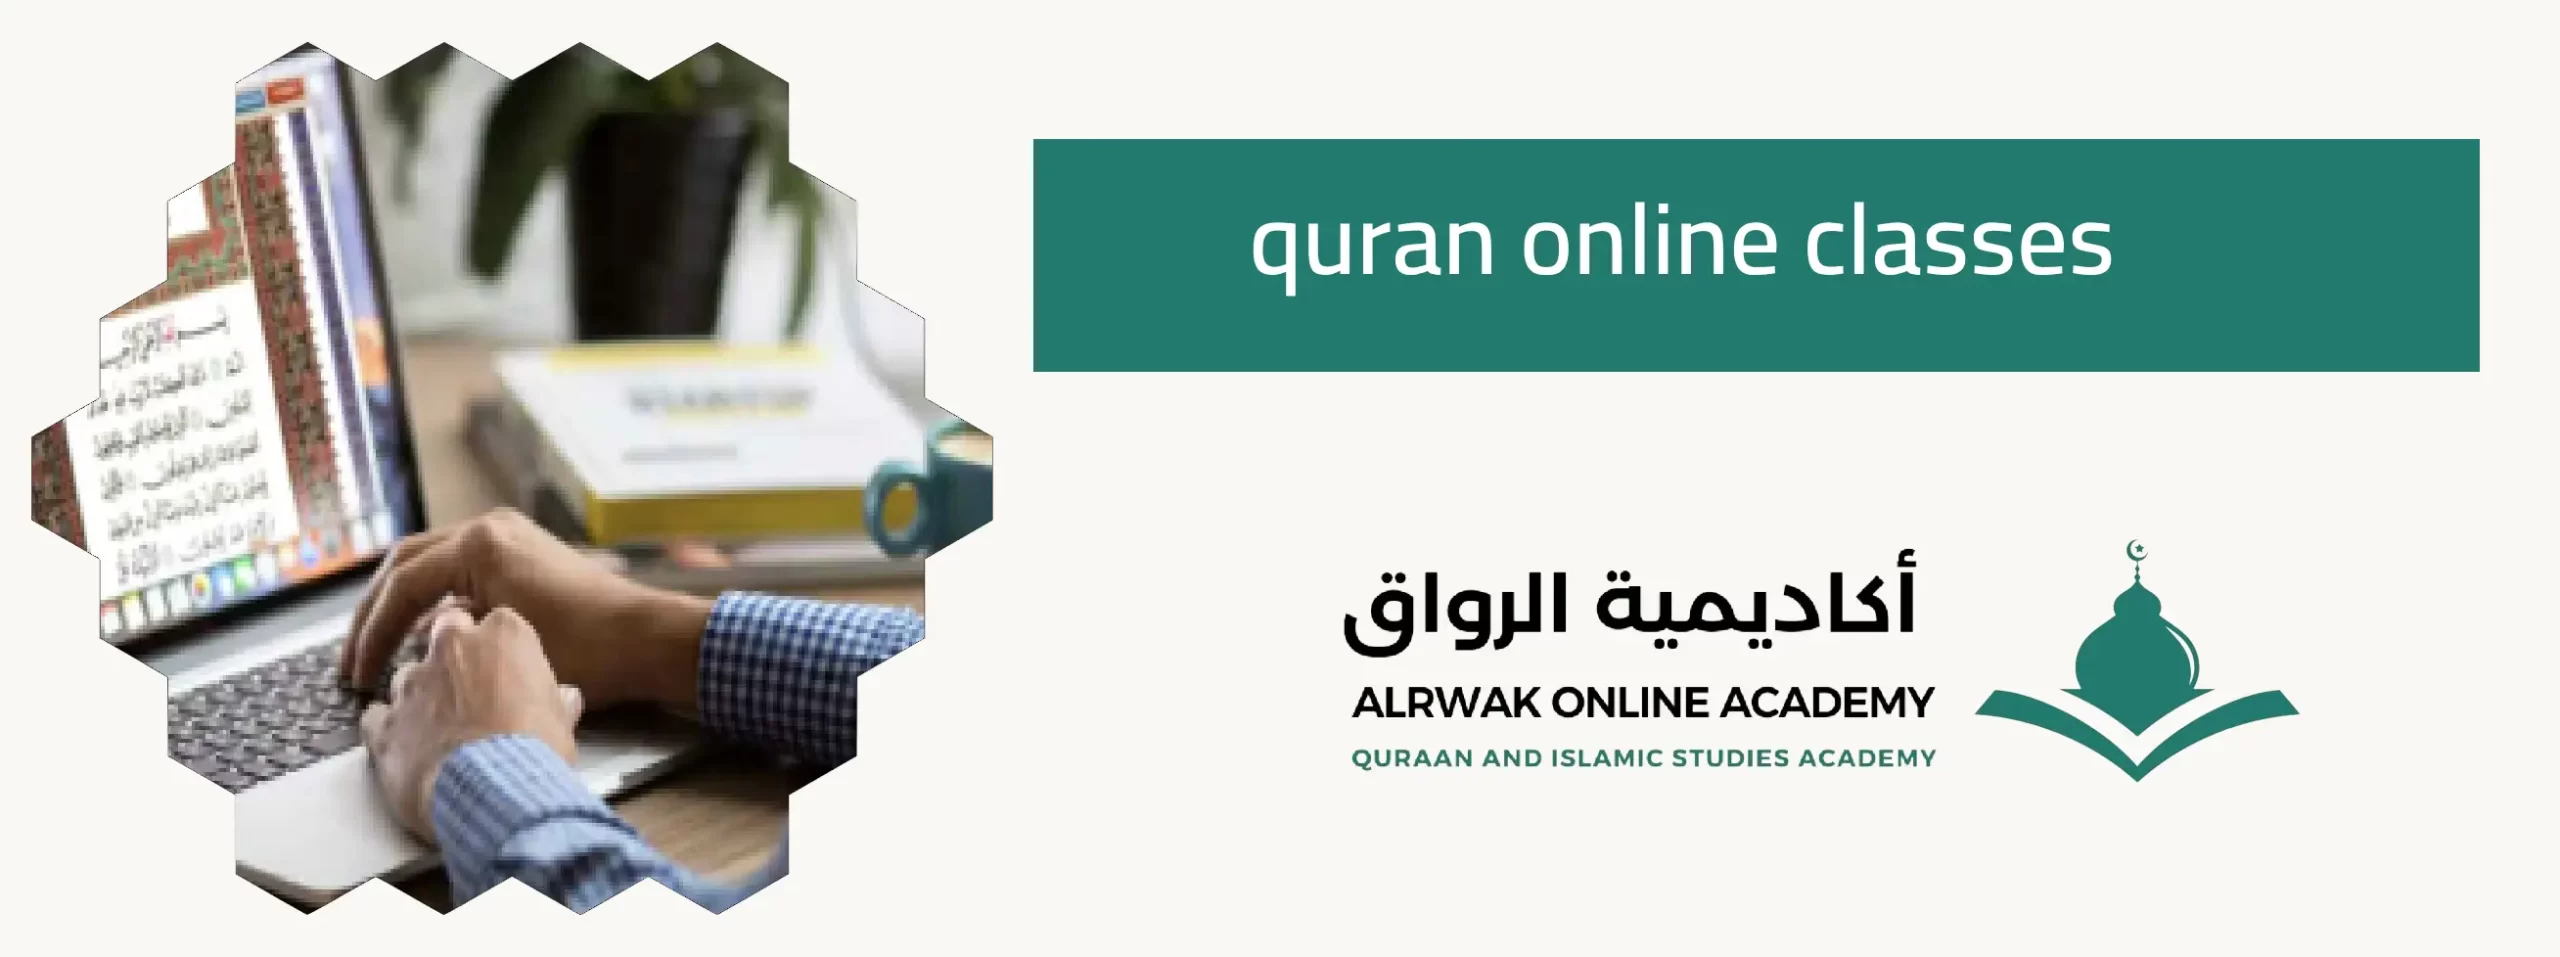 Learning quran online free